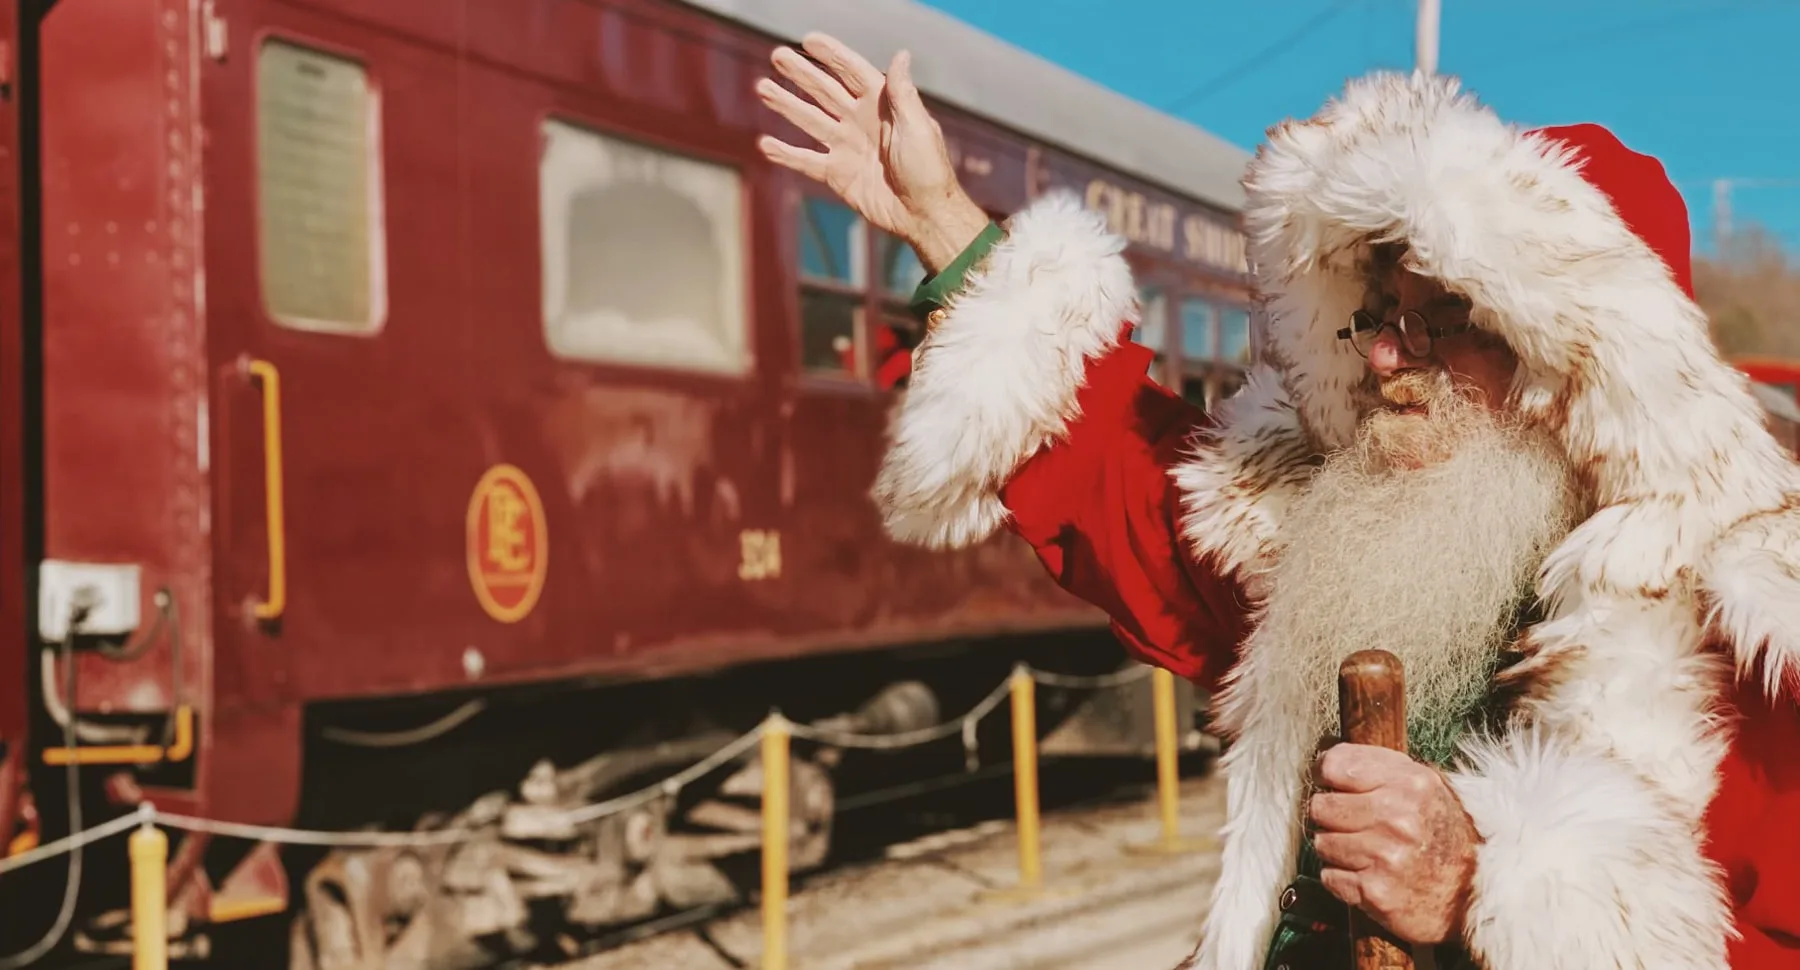 santa standing in front of the great smoky mountain train at christmas 